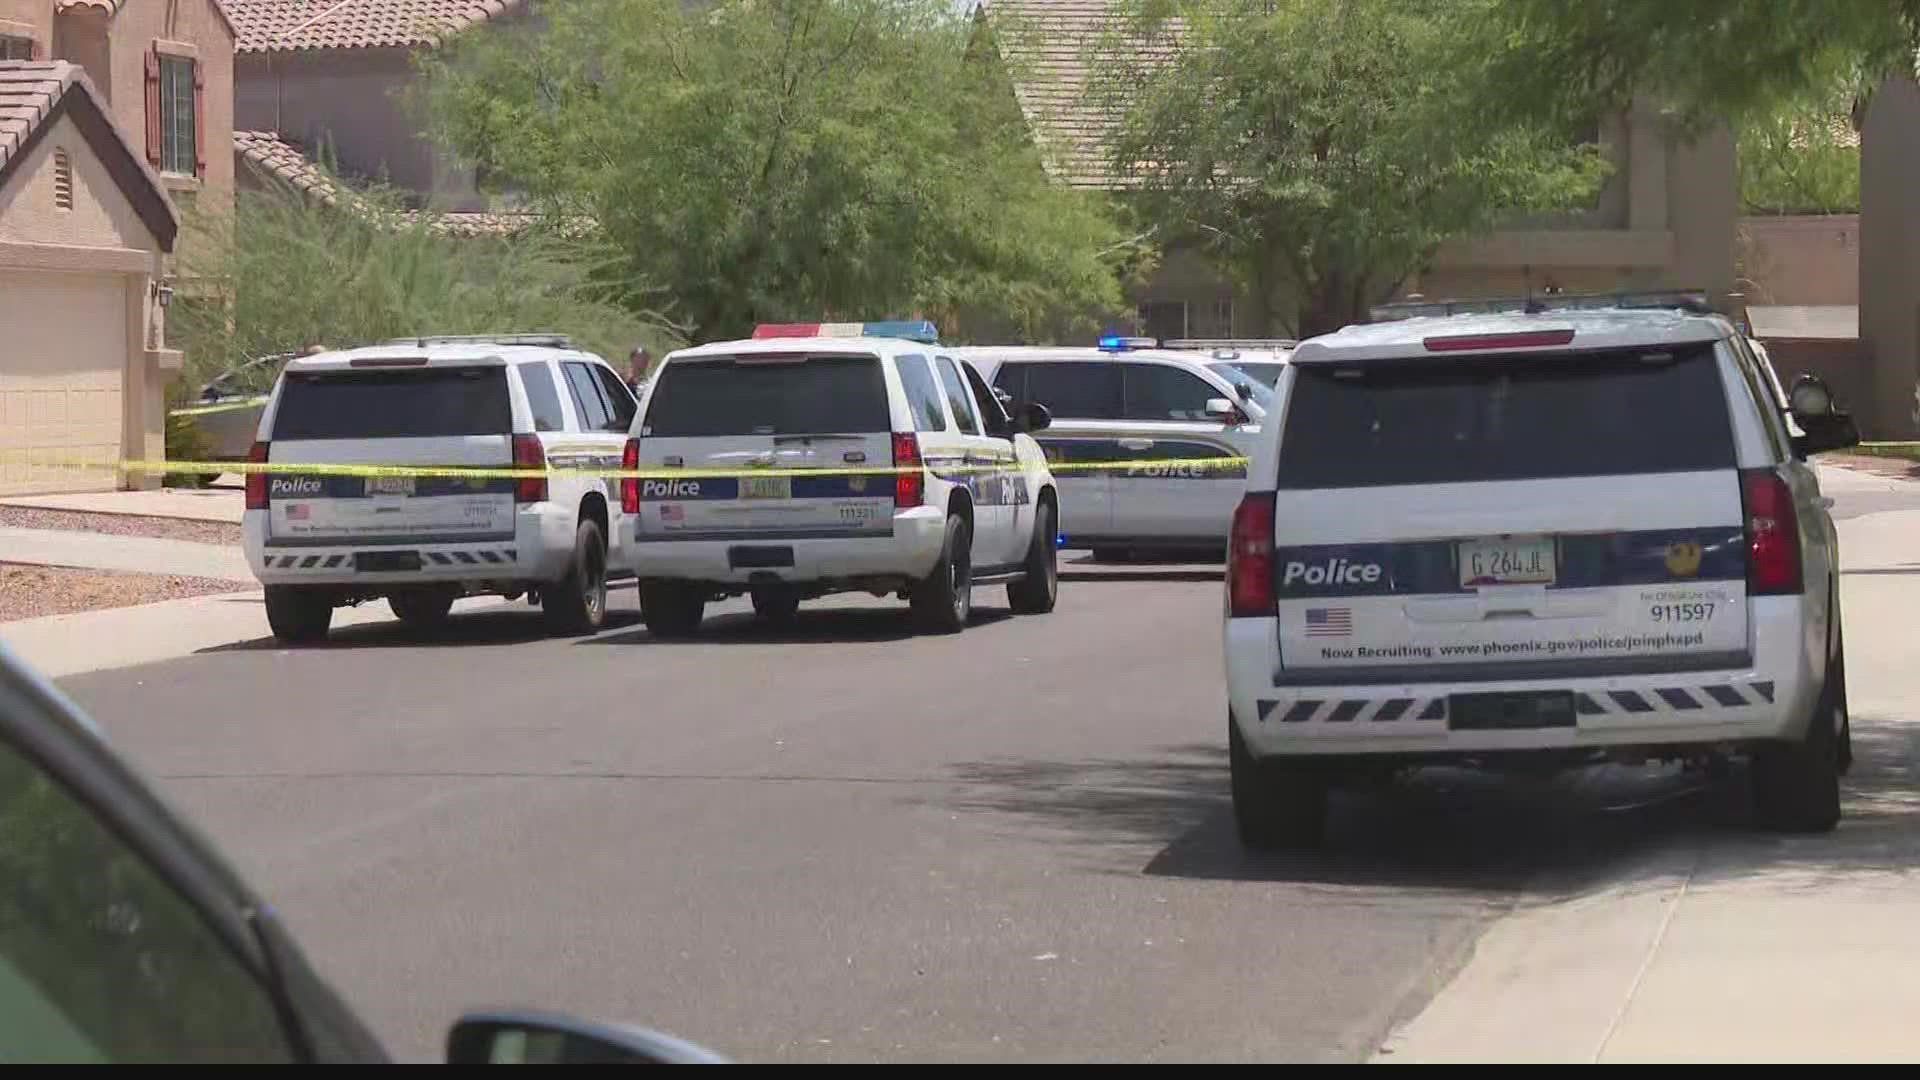 No officers were injured in the shooting, the Phoenix Police Department said.